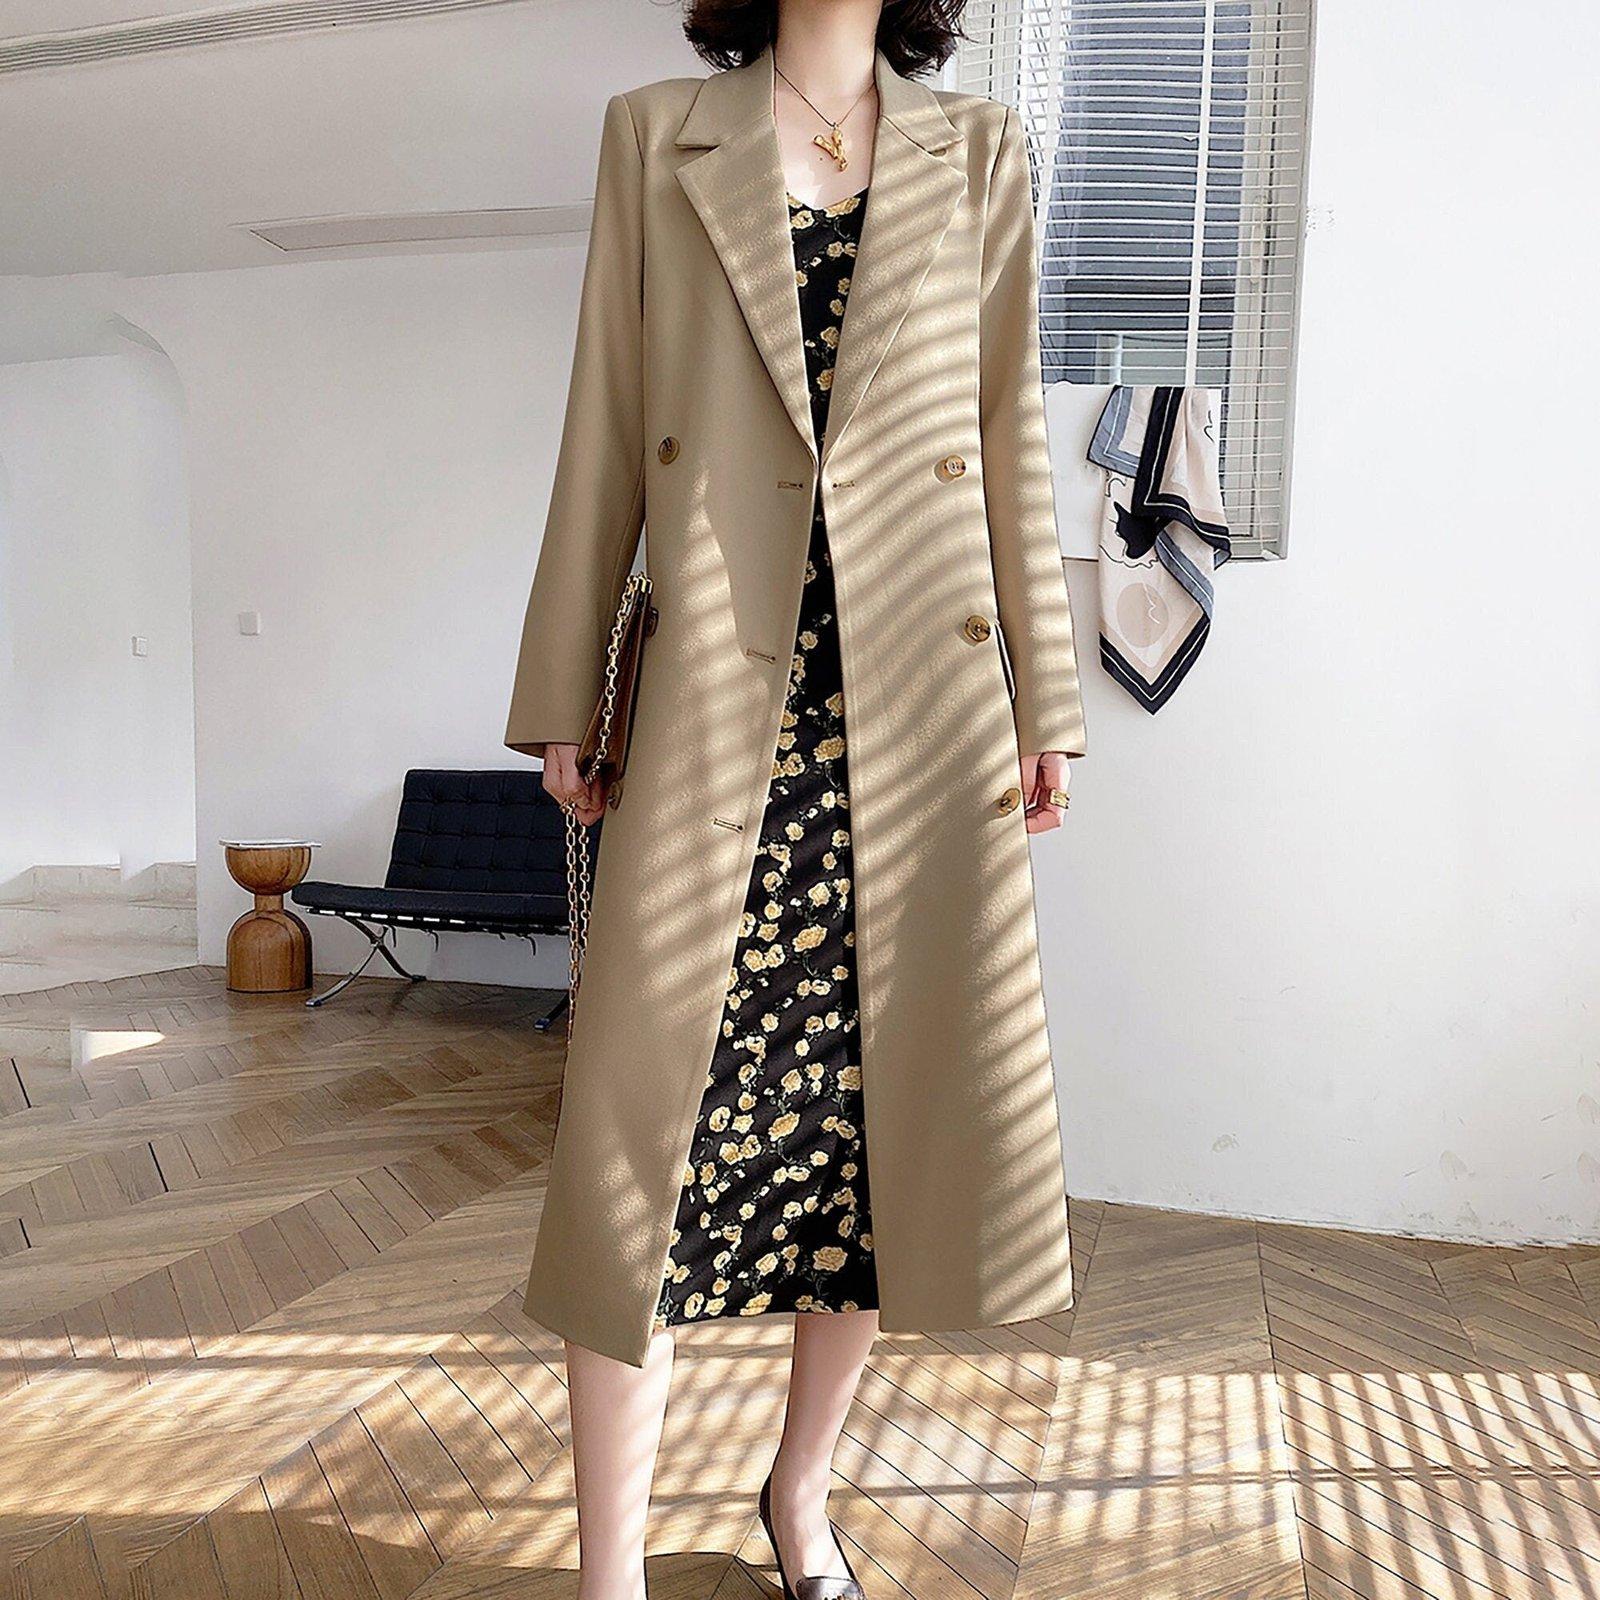 Cotton Belted Trench Coat